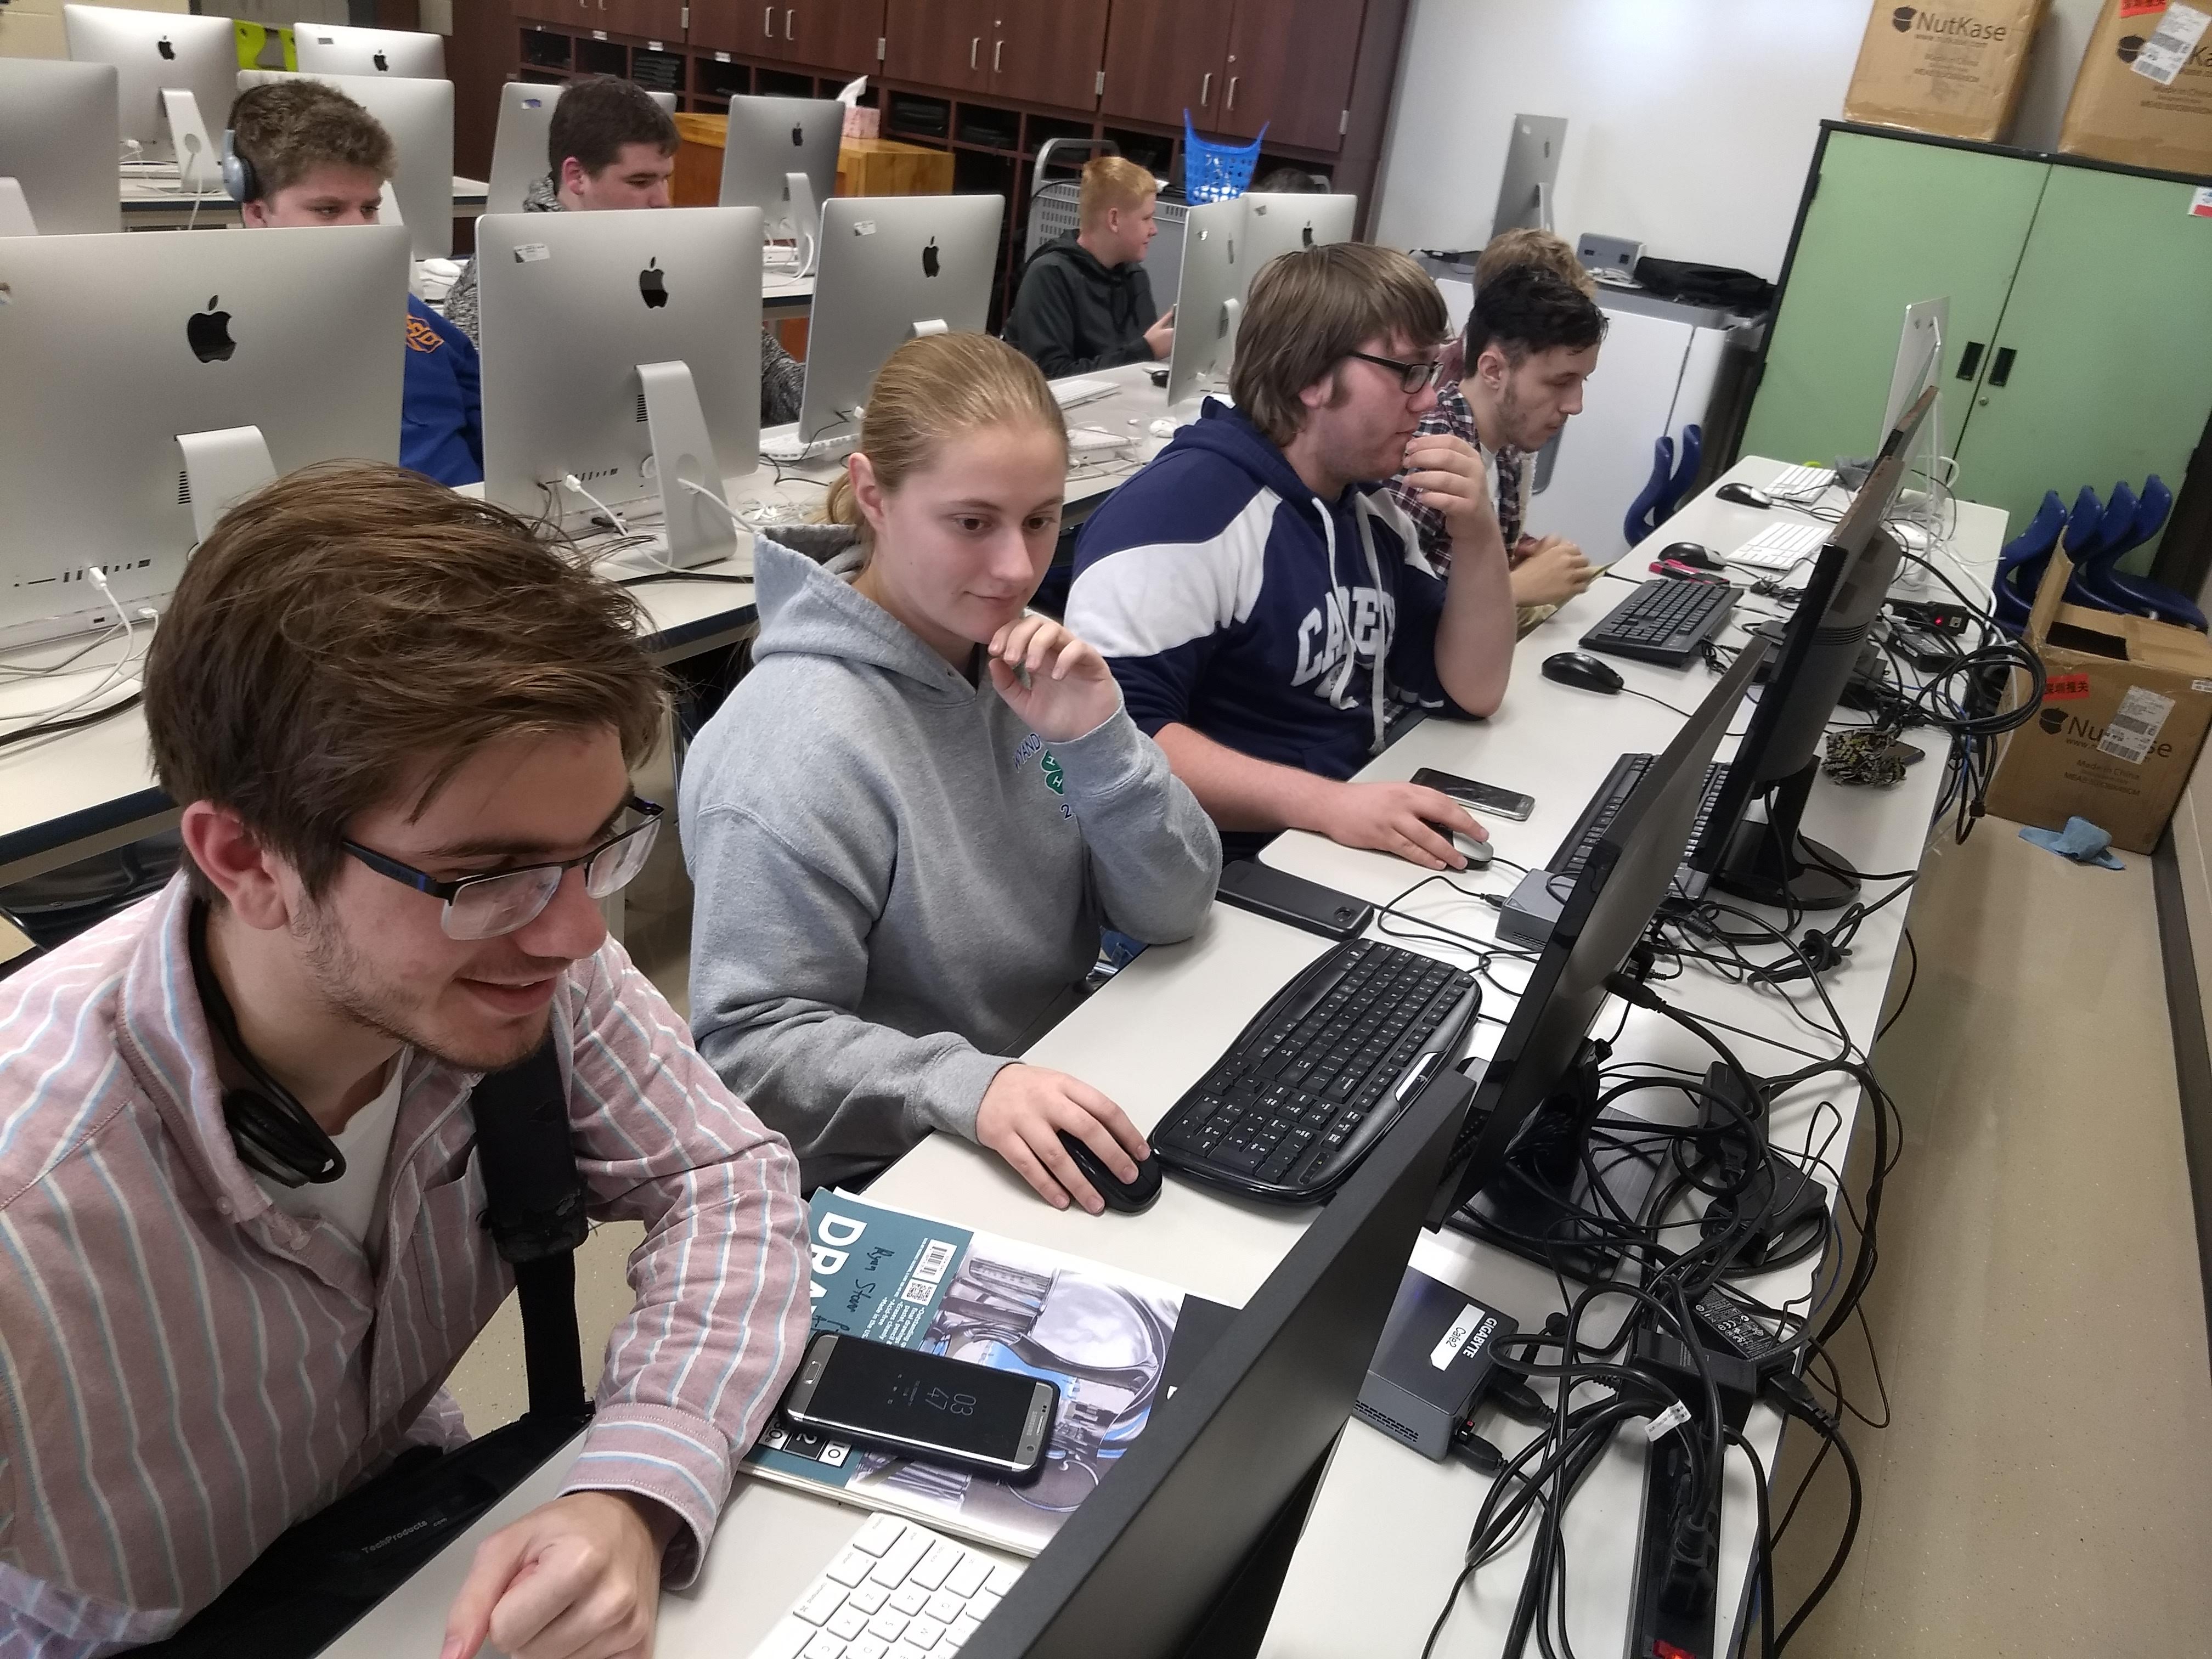 The esports team at Carey Exempted Village School District in Ohio received $5,000 from administrators to build six computers from scratch to use in practice and competition.